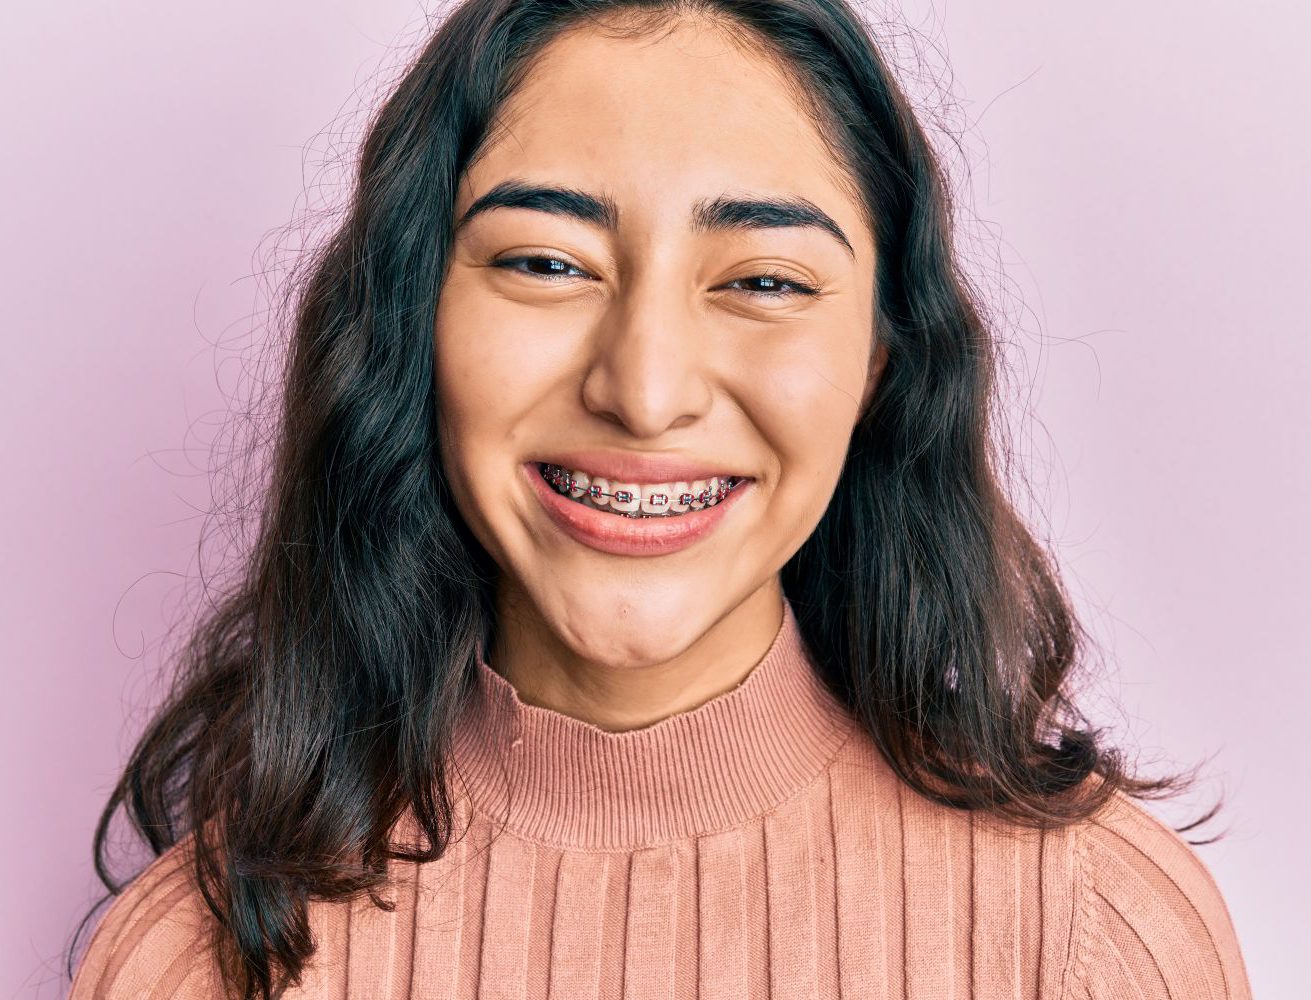 young Teen with braces smiling